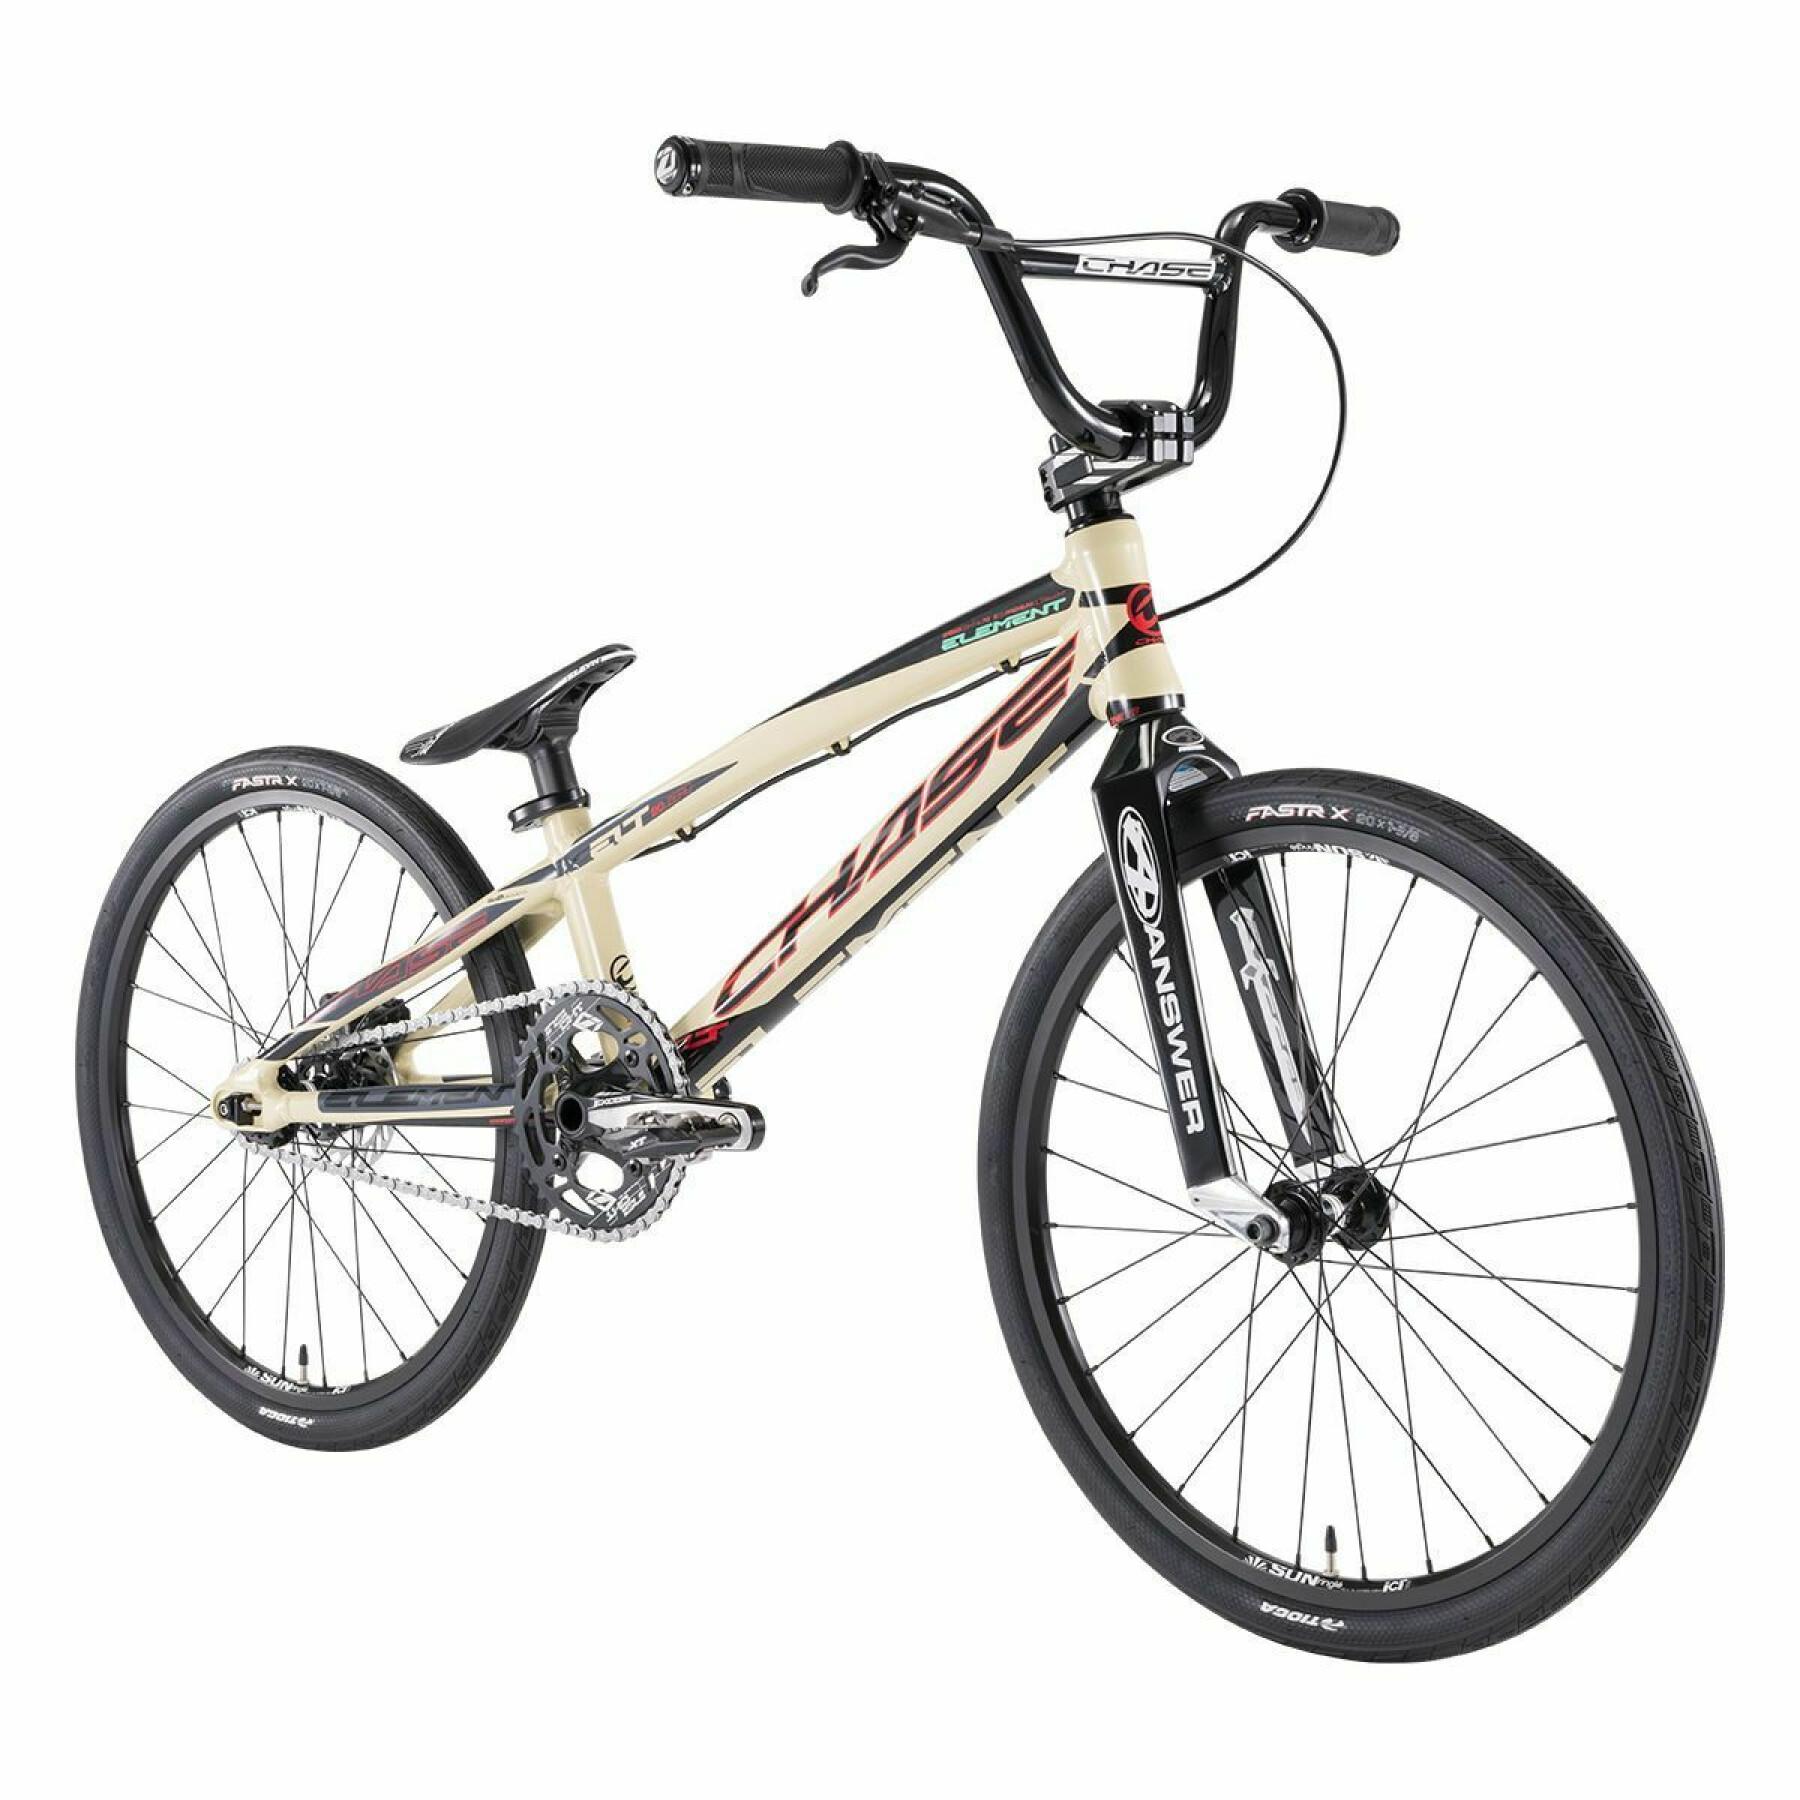 Kinderfiets Chase element 2021 Expert